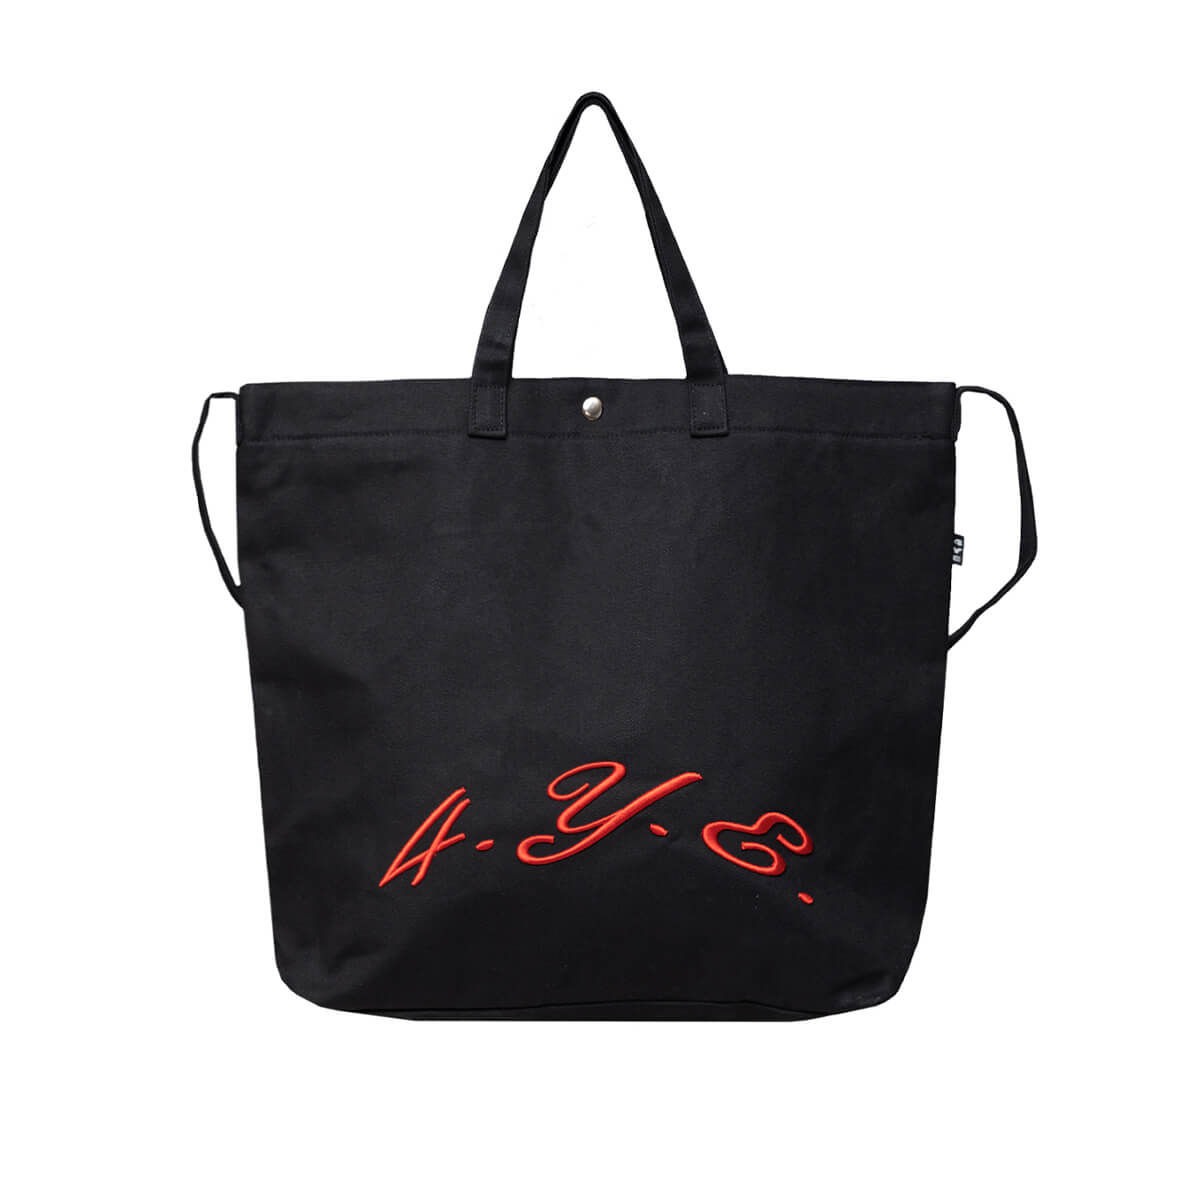 All-in Tote Bag in Black with stitched 4YE logo detail in red 